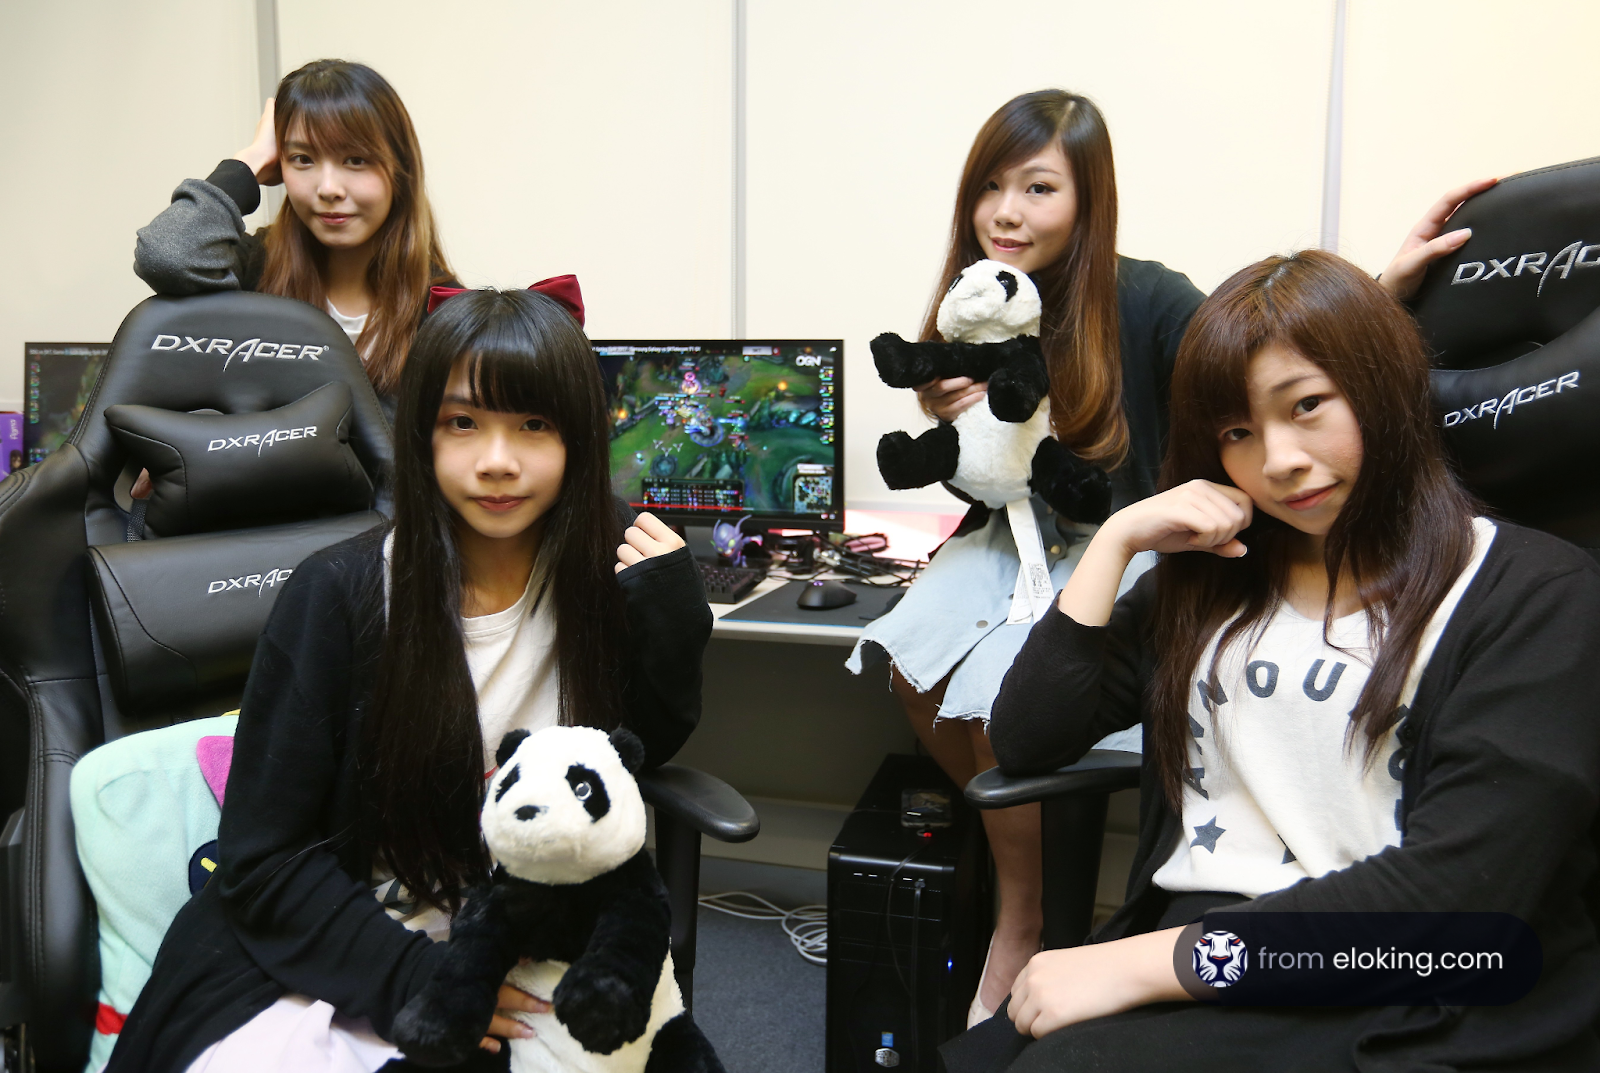 Young women posing with computer gaming setups and plush toys